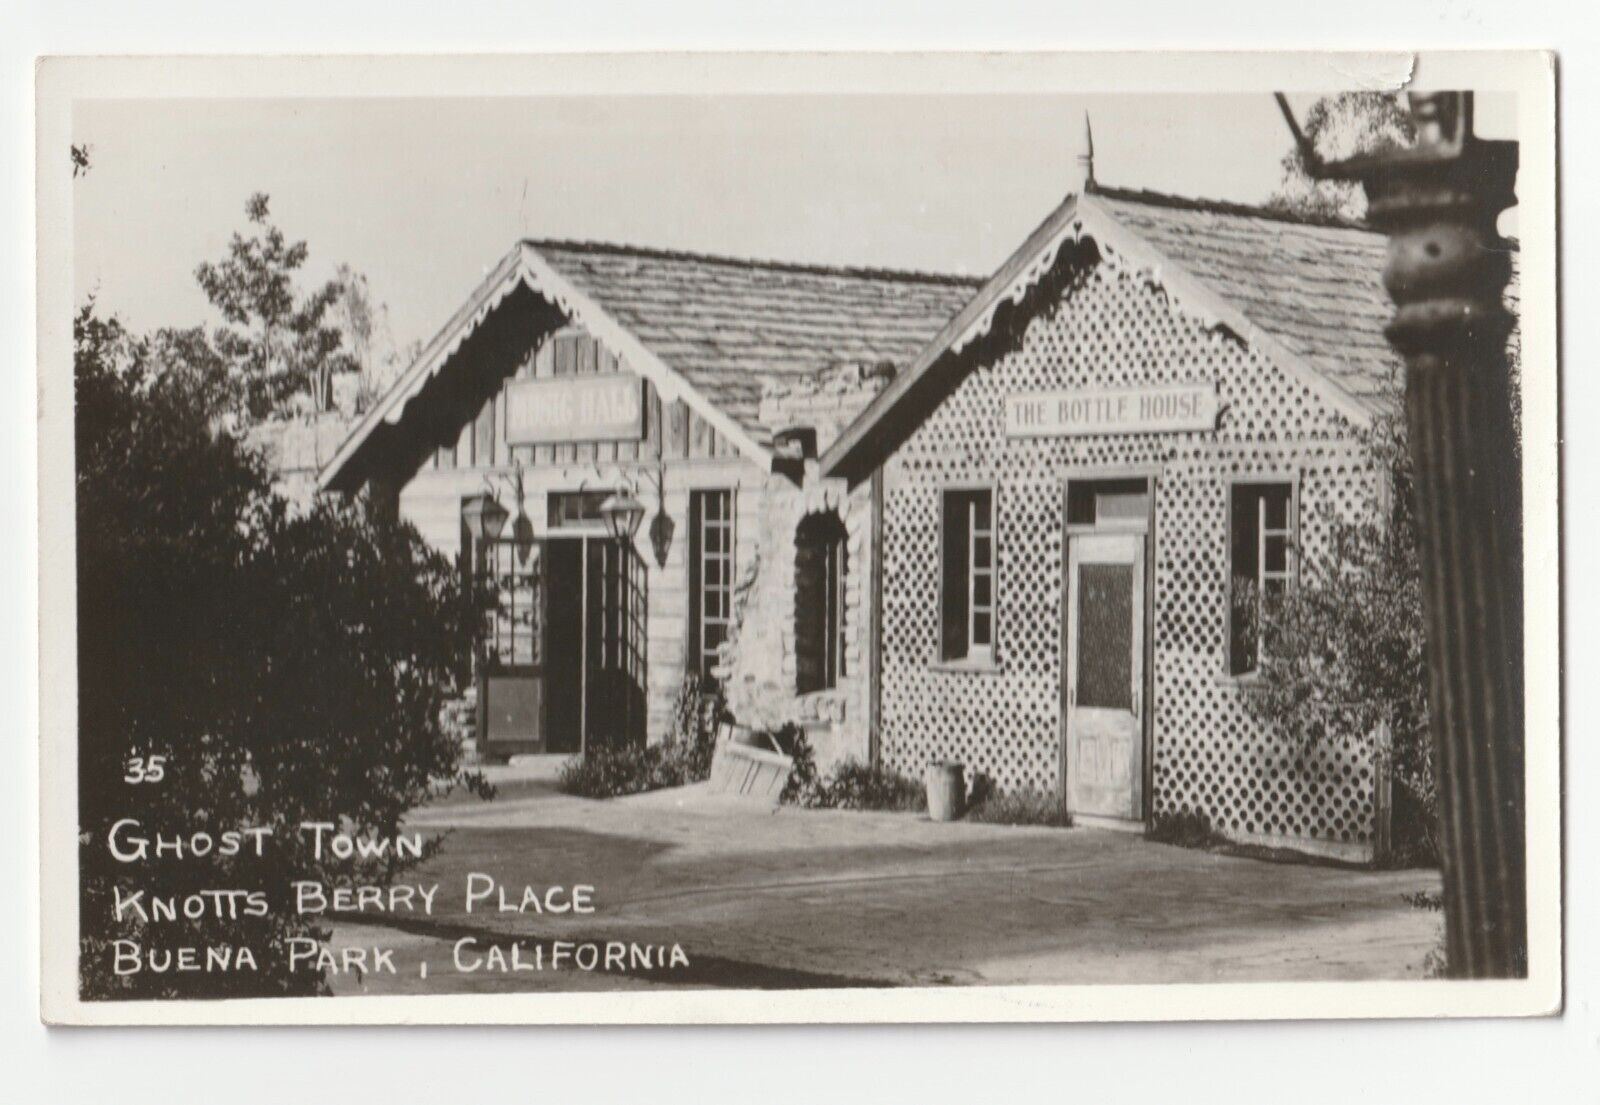 Ghost Town at Knotts Berry Place-Buena Park, California CA-rppc c. 1940s antique